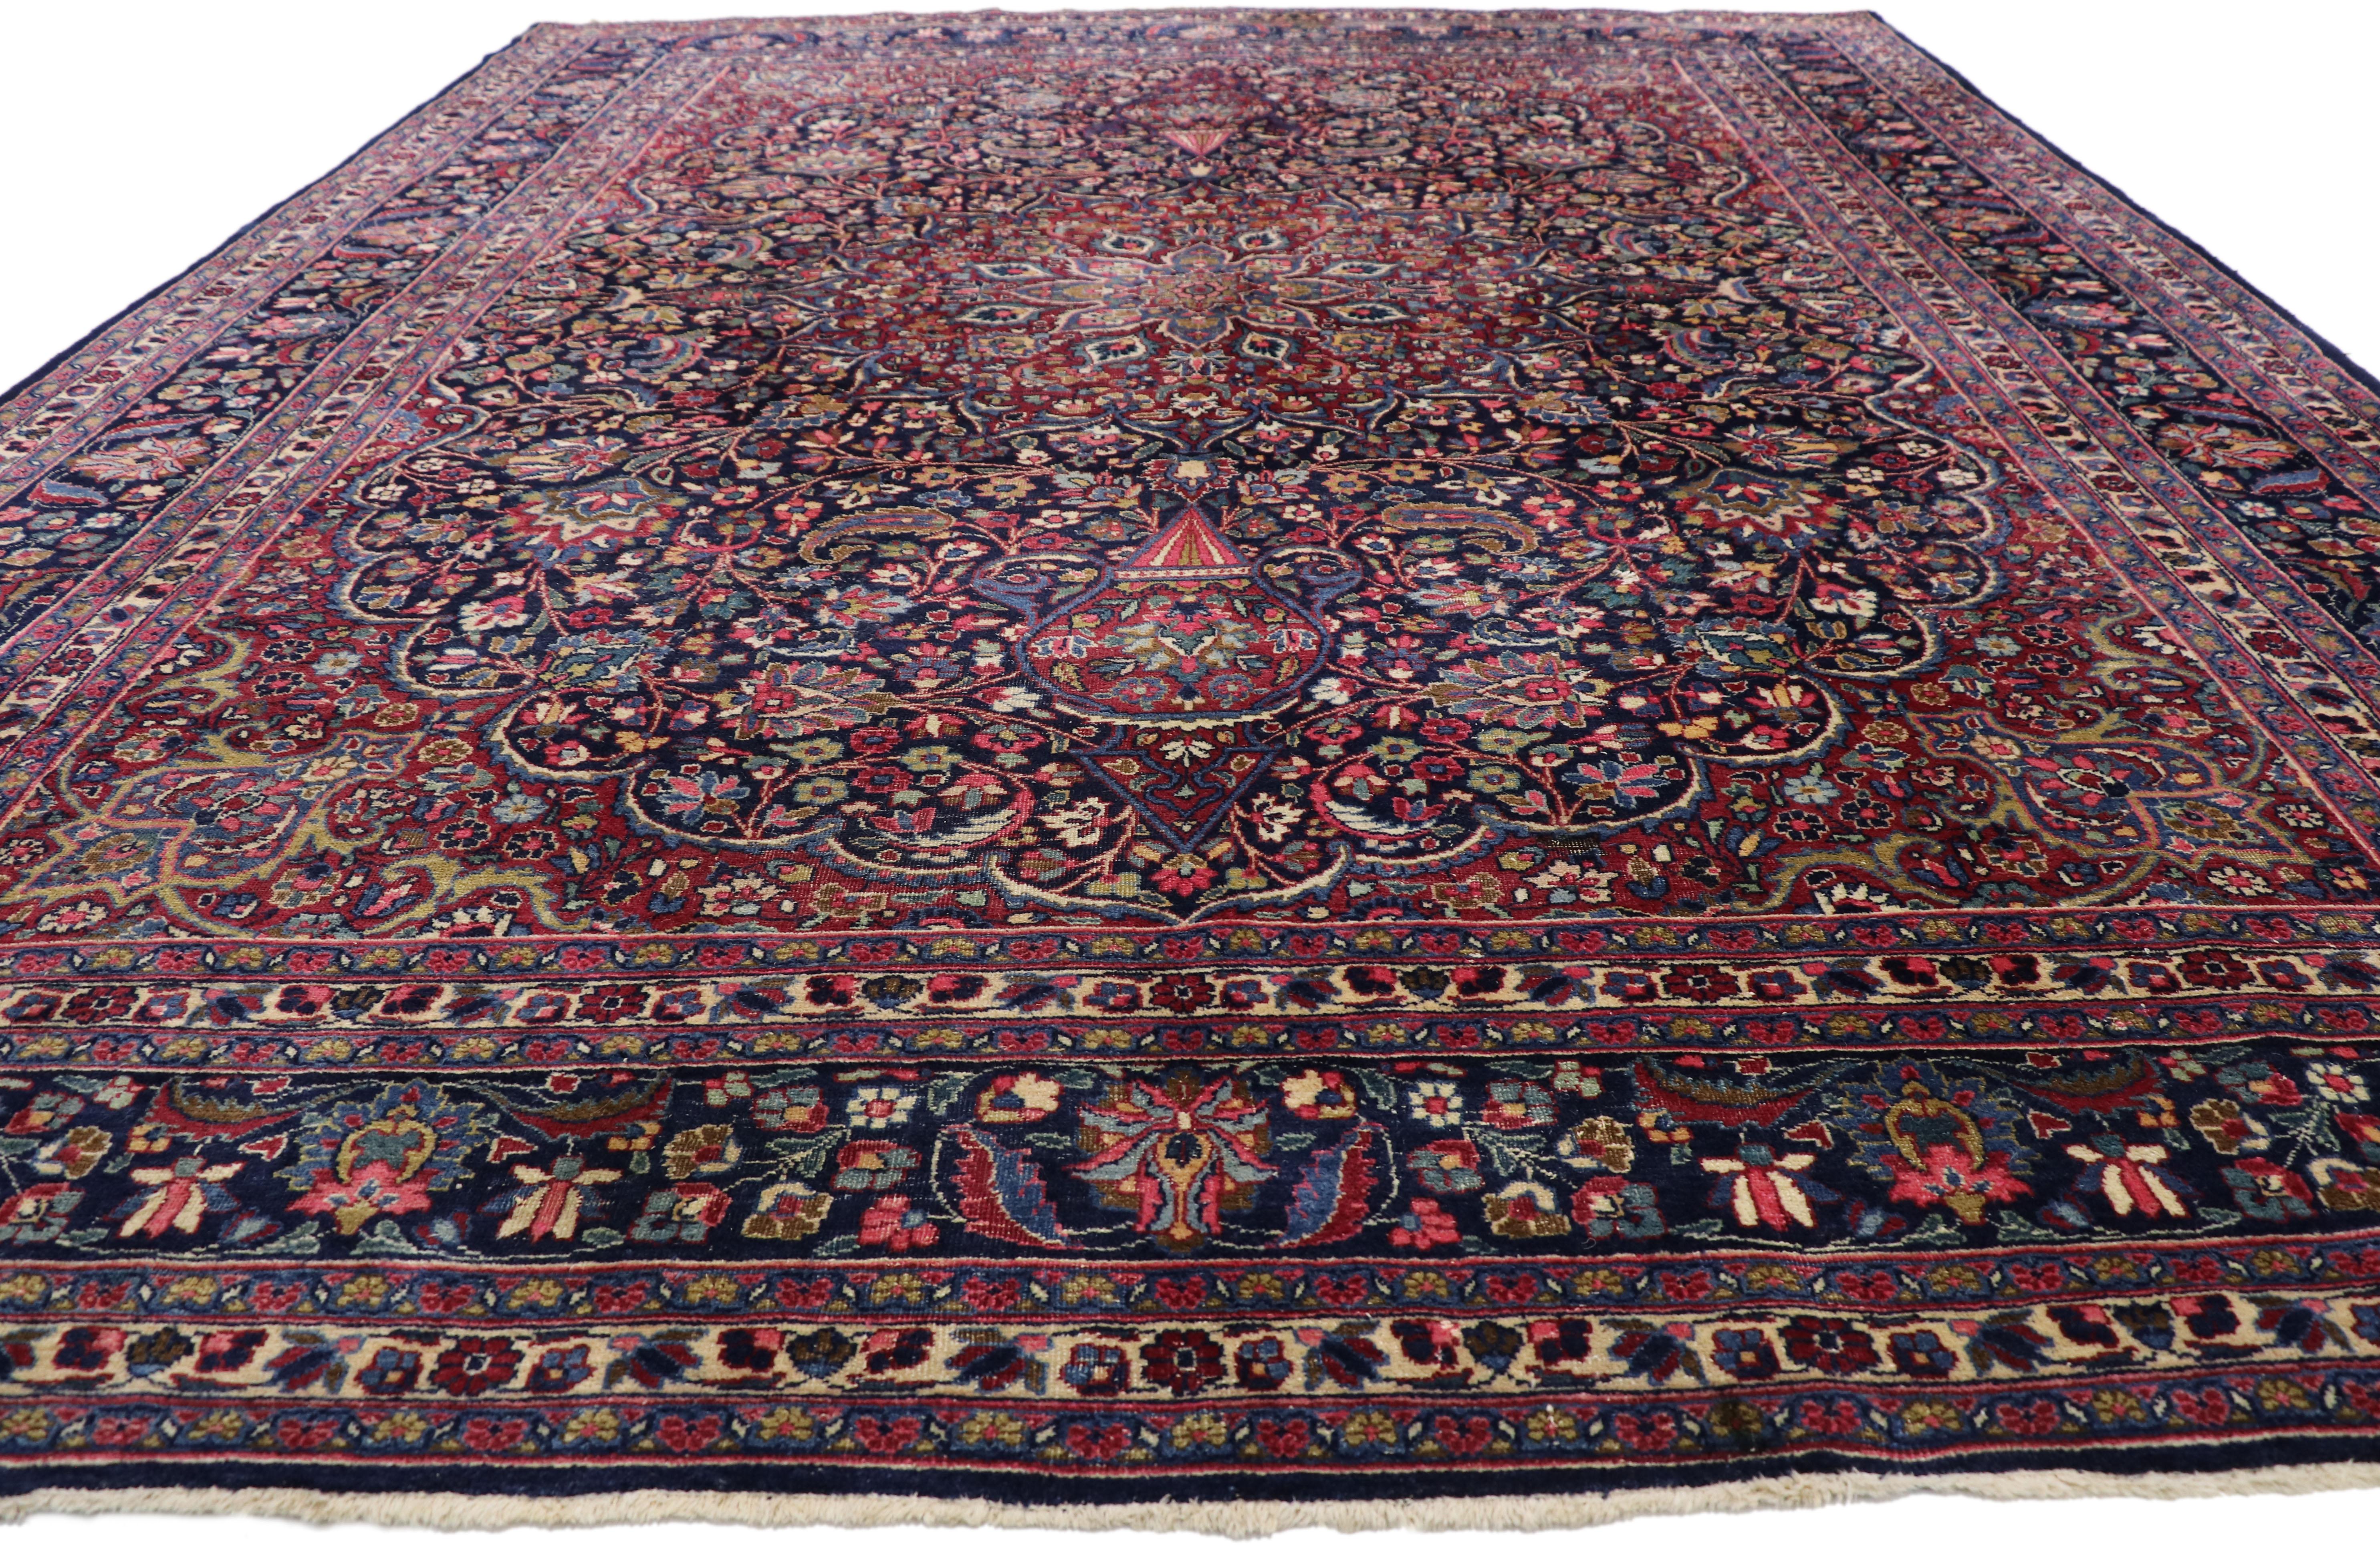 Hand-Knotted Vintage Persian Mashhad Area Rug with Arabesque Baroque Regency Style